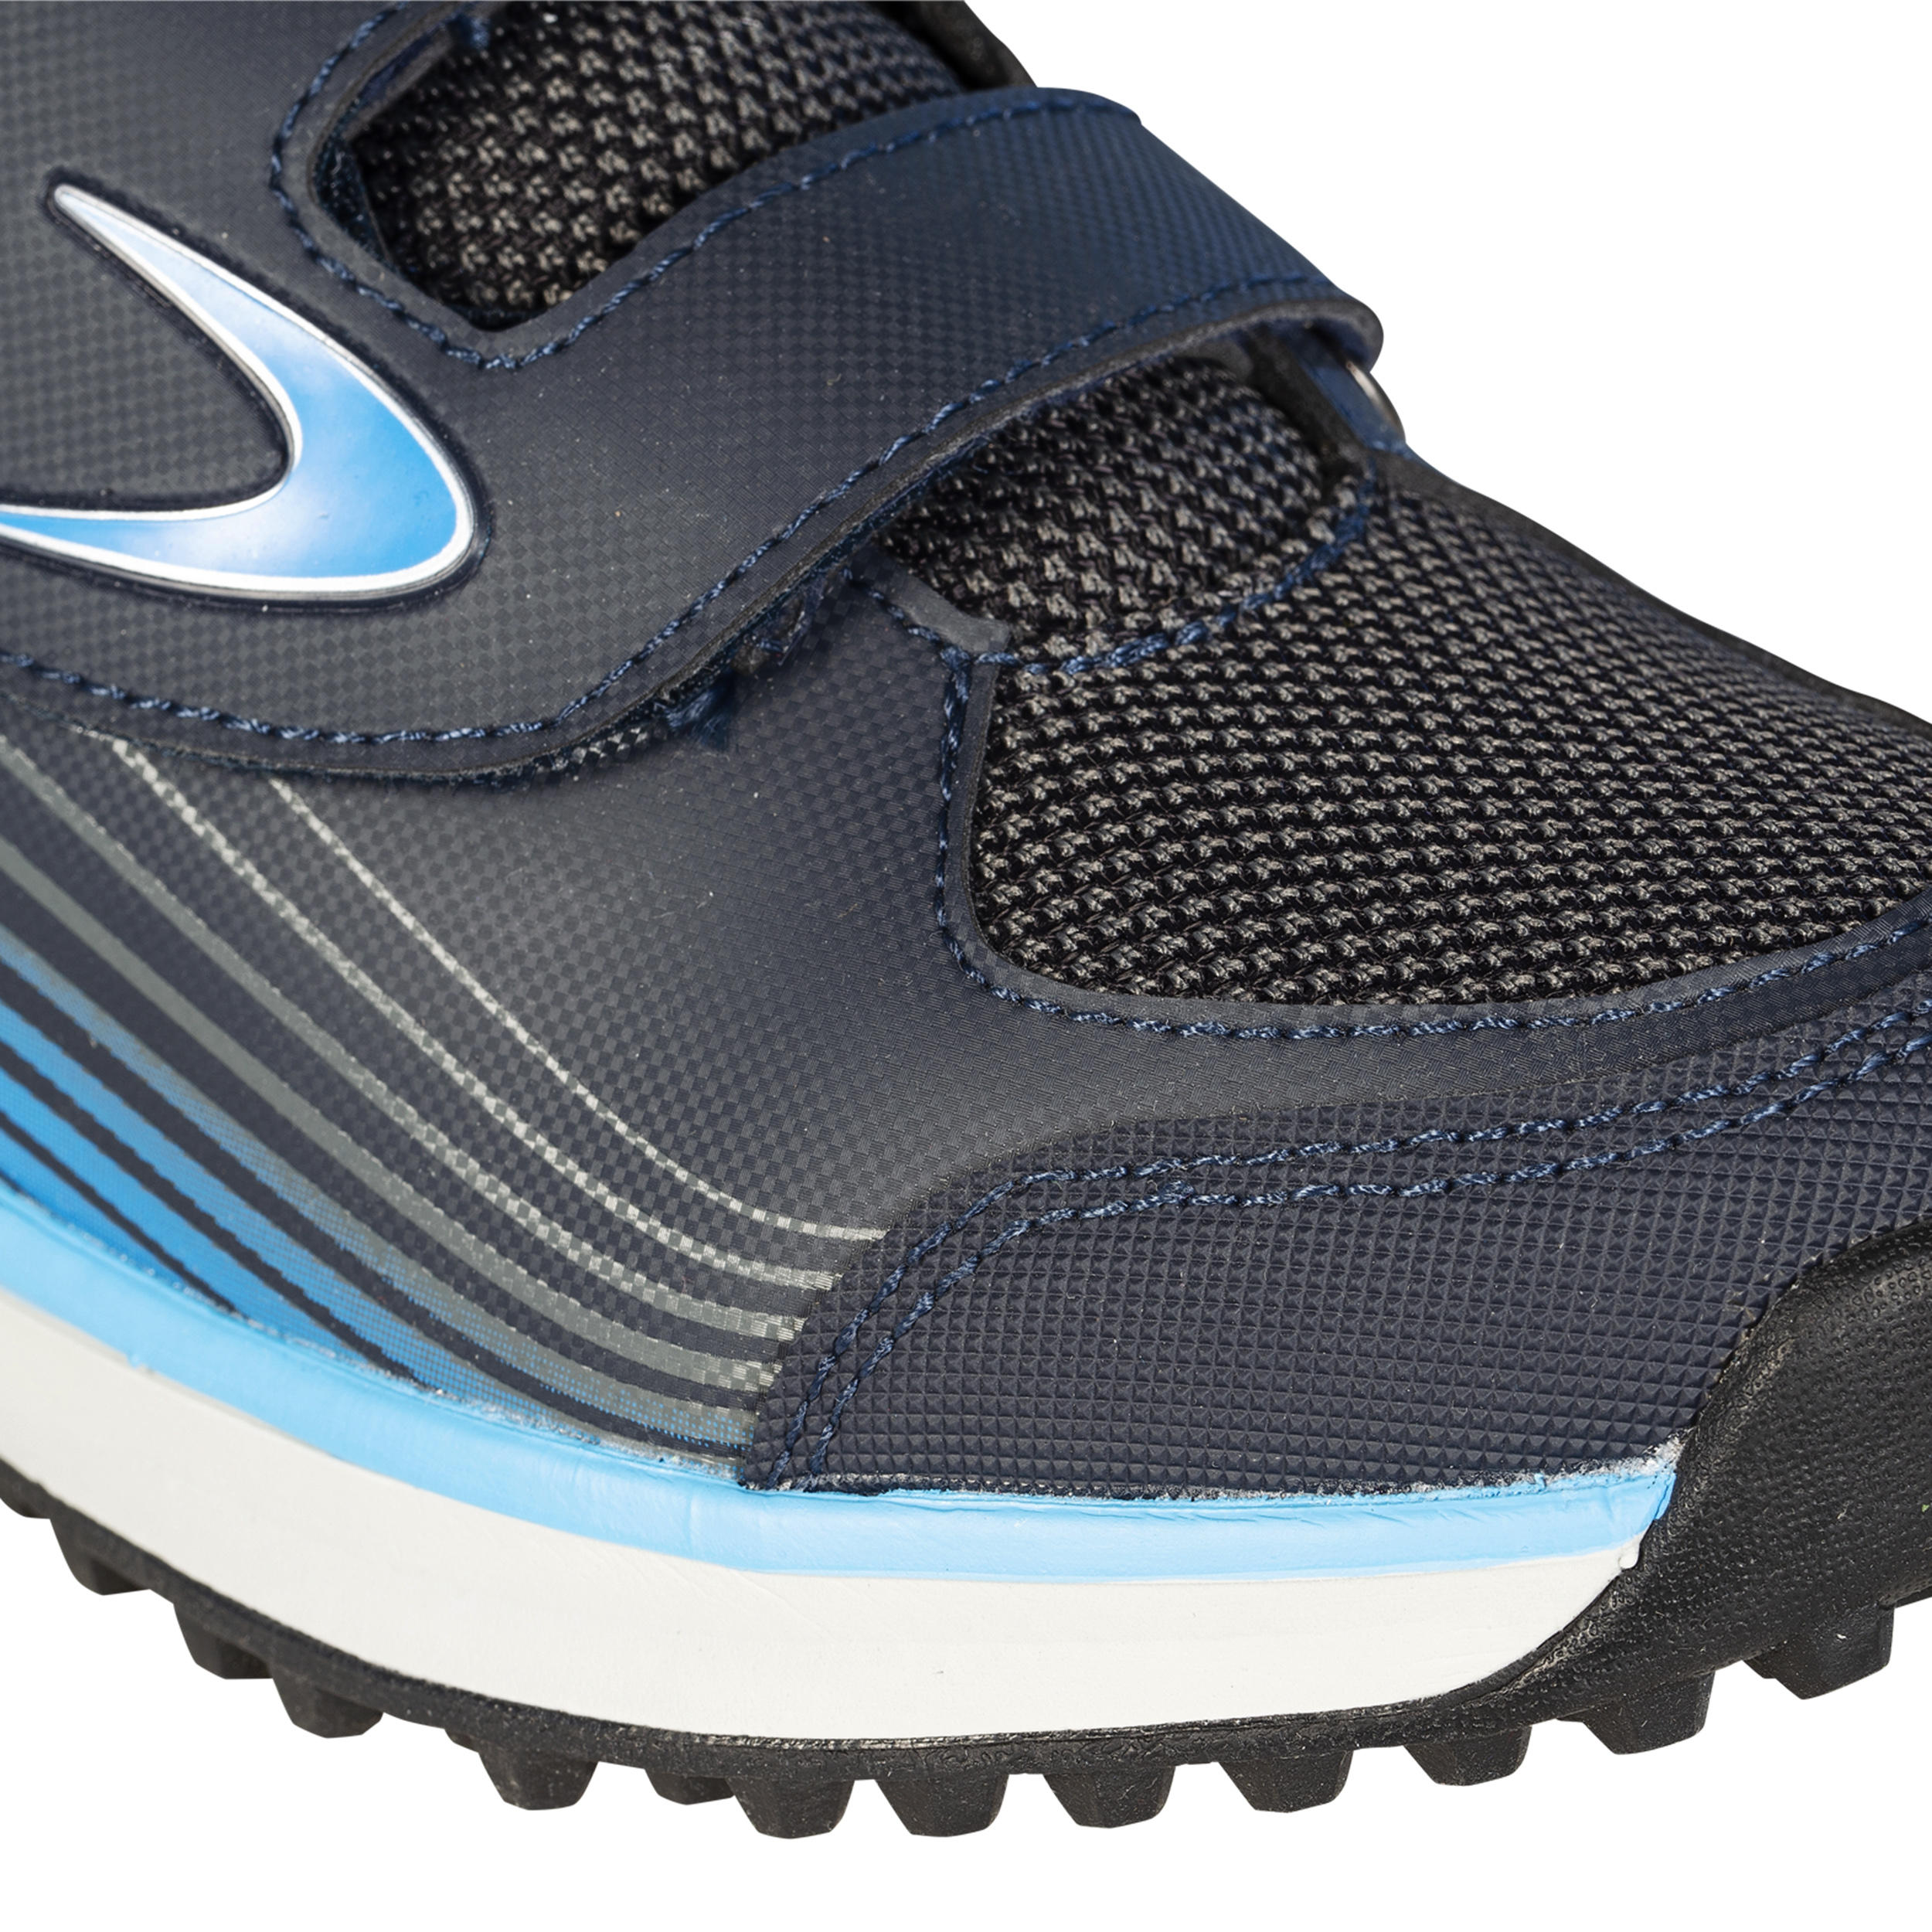 Kids' Low-Intensity Field Hockey Shoes Fix And Go - Blue/Grey 4/8